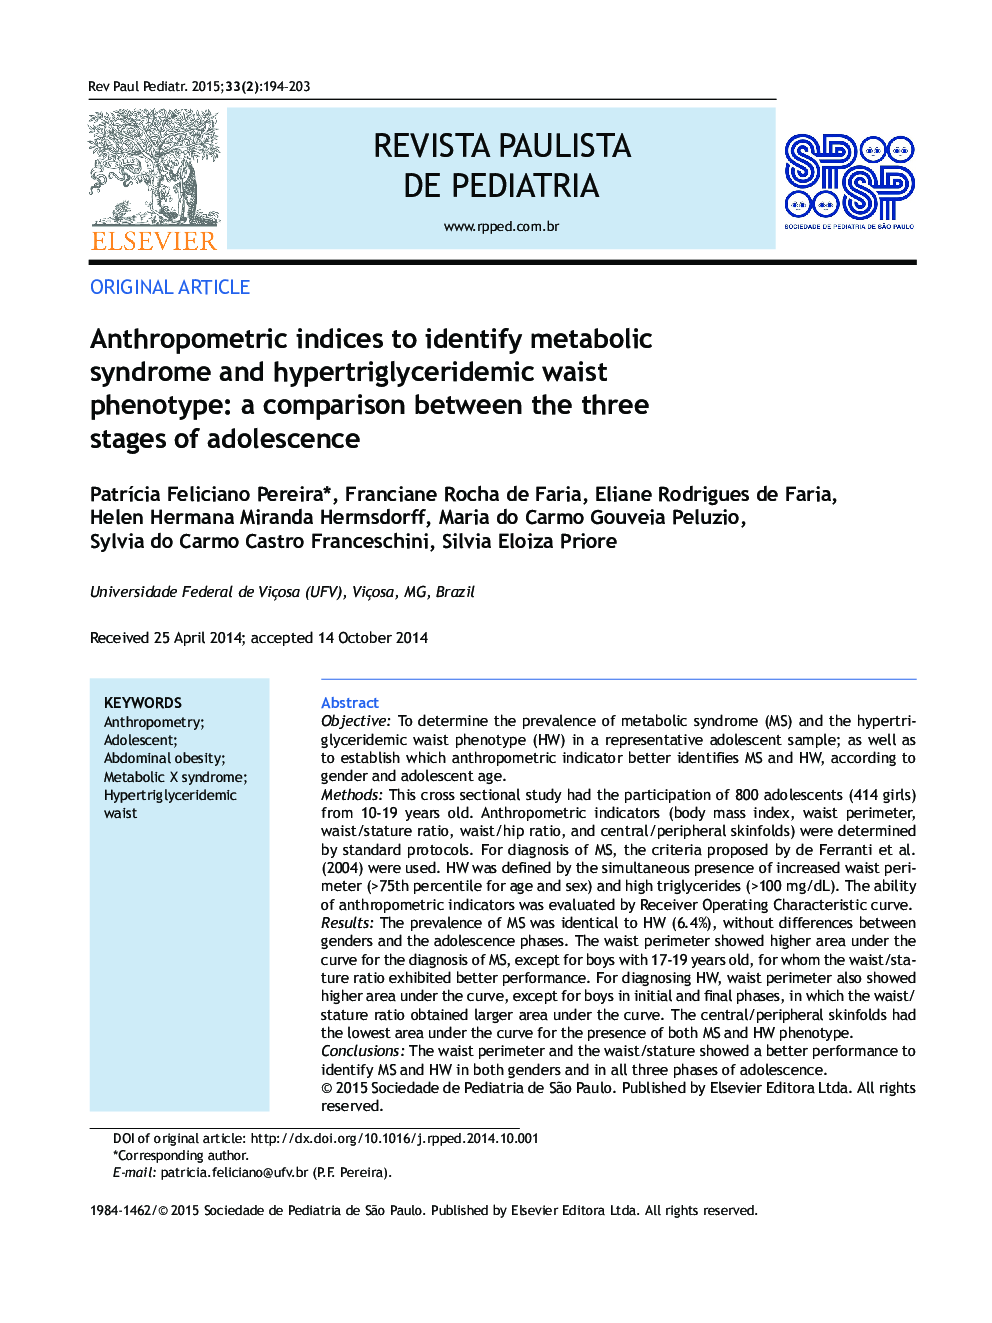 Anthropometric indices to identify metabolic syndrome and hypertriglyceridemic waist phenotype: a comparison between the three stages of adolescence